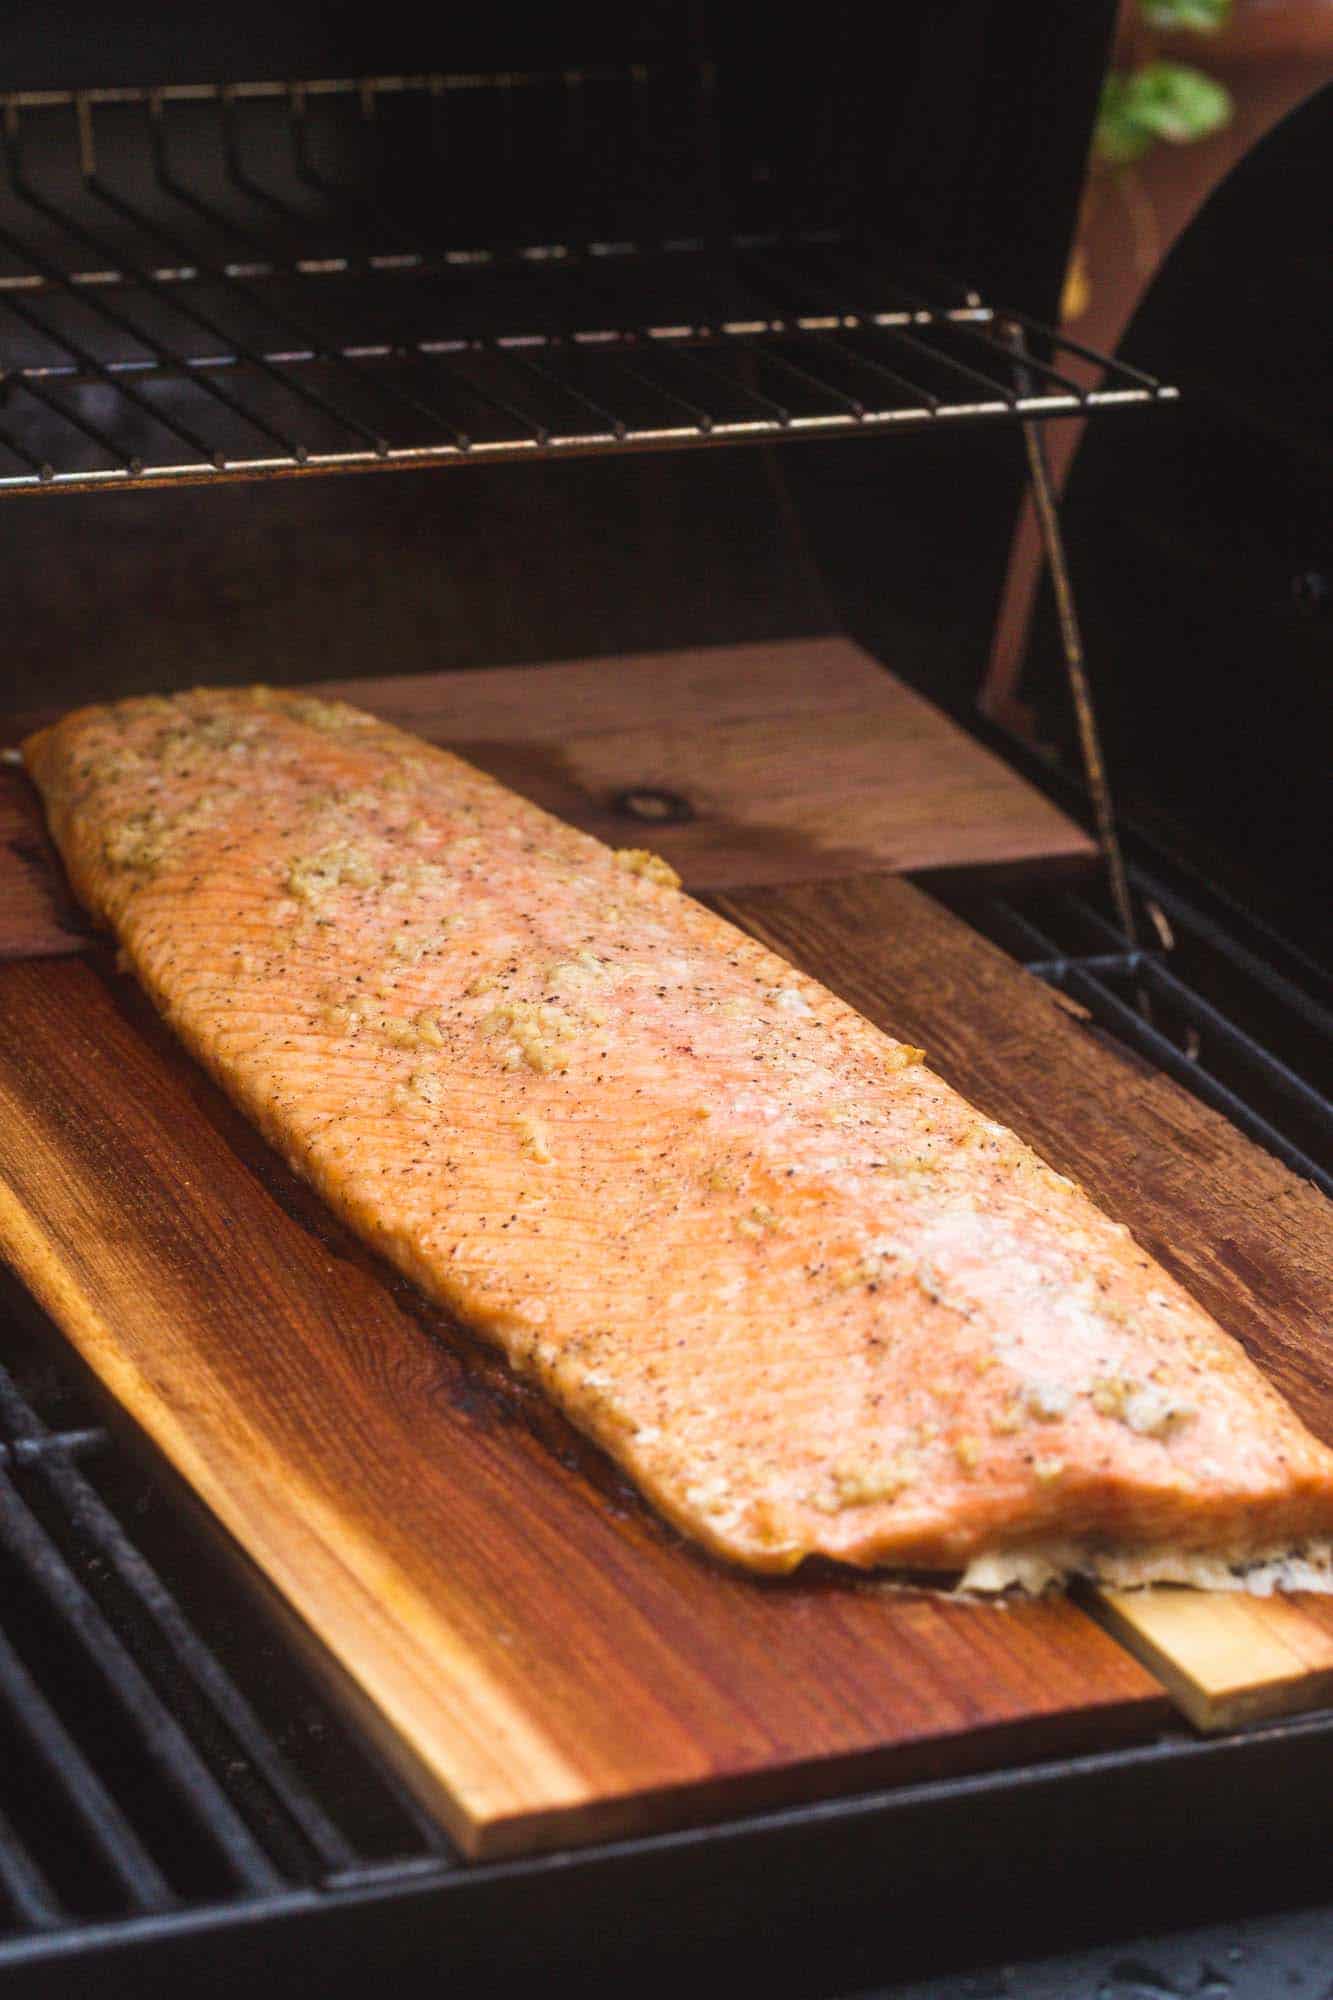 Half size of salmon cooked on a cedar plank on the grill